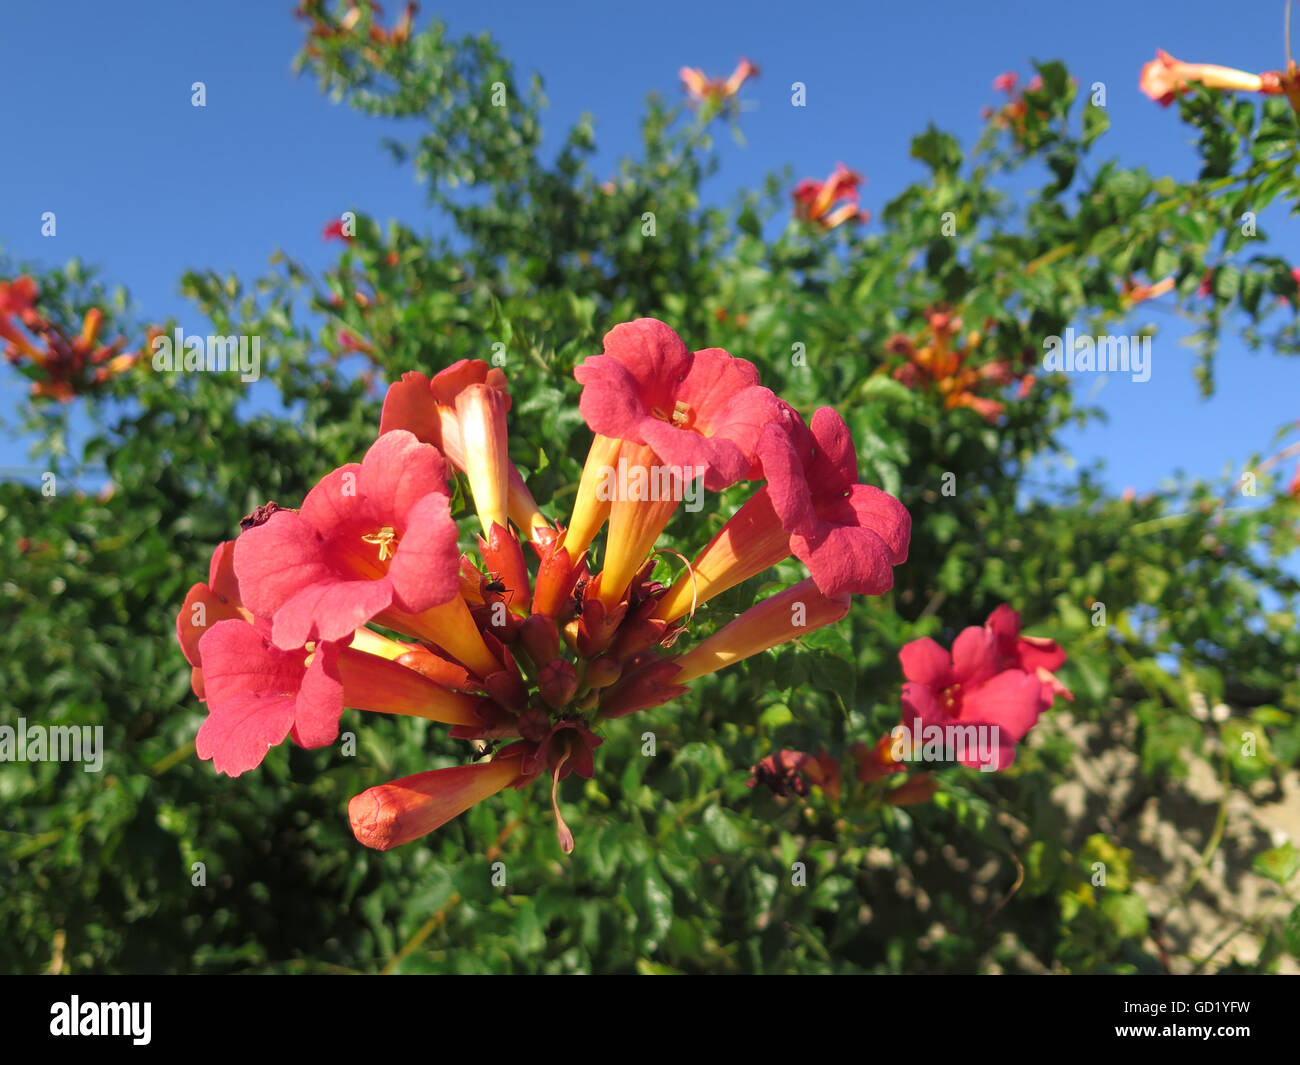 Trumpet creeper, Campsis radicans, flowering in a Spanish garden Stock Photo